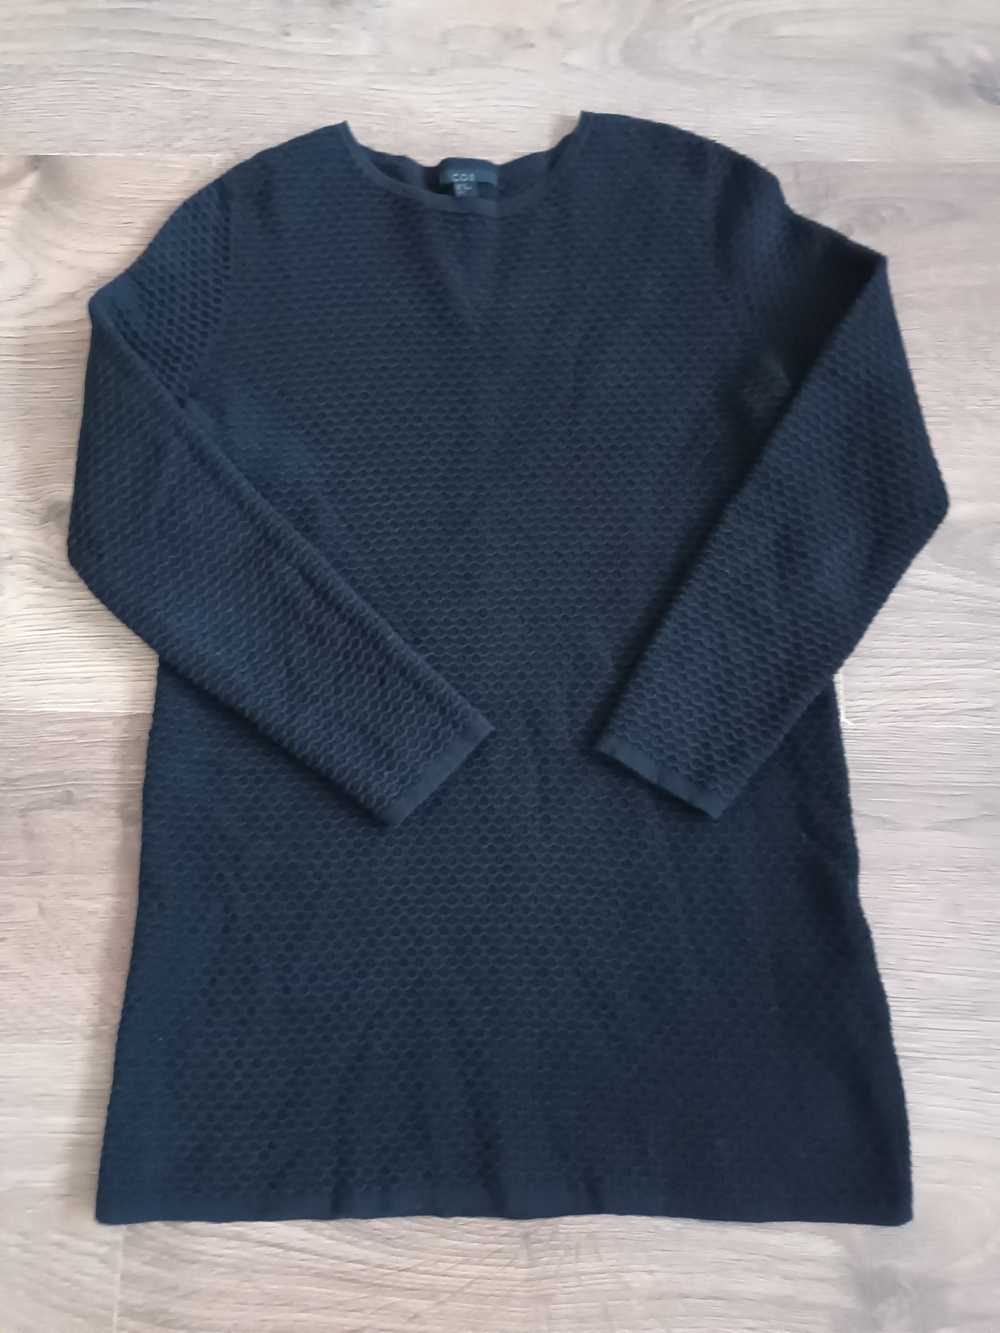 Cos COS Womens Waffle Knit Black Sweater Size XS - image 1